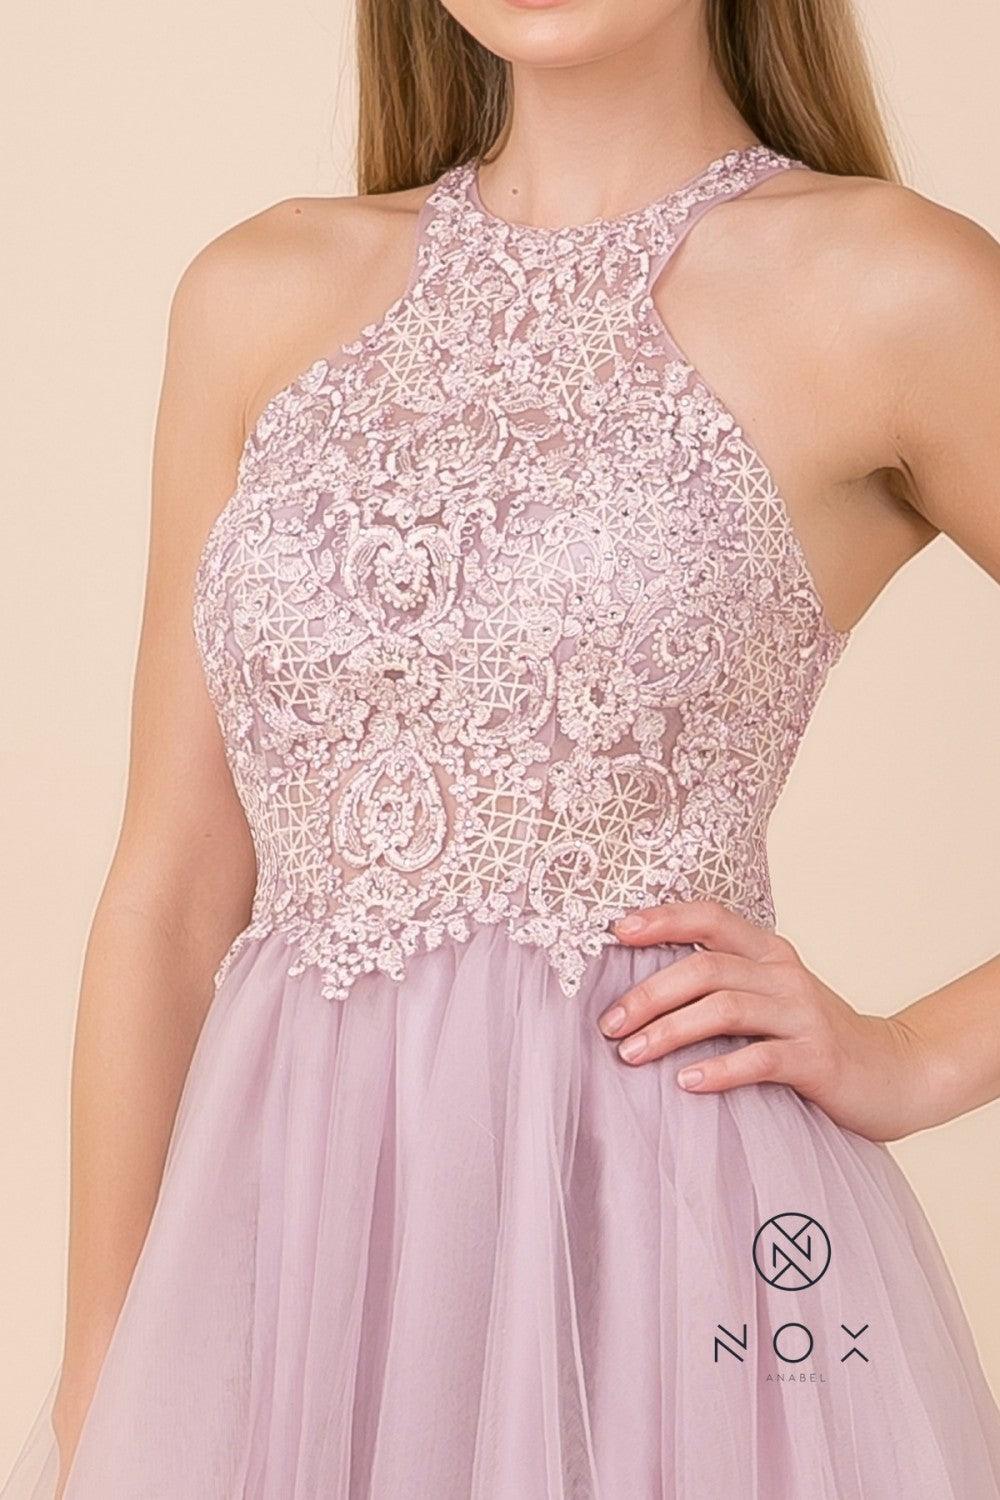 Prom Short Dress Sleeveless Homecoming - The Dress Outlet Nox Anabel